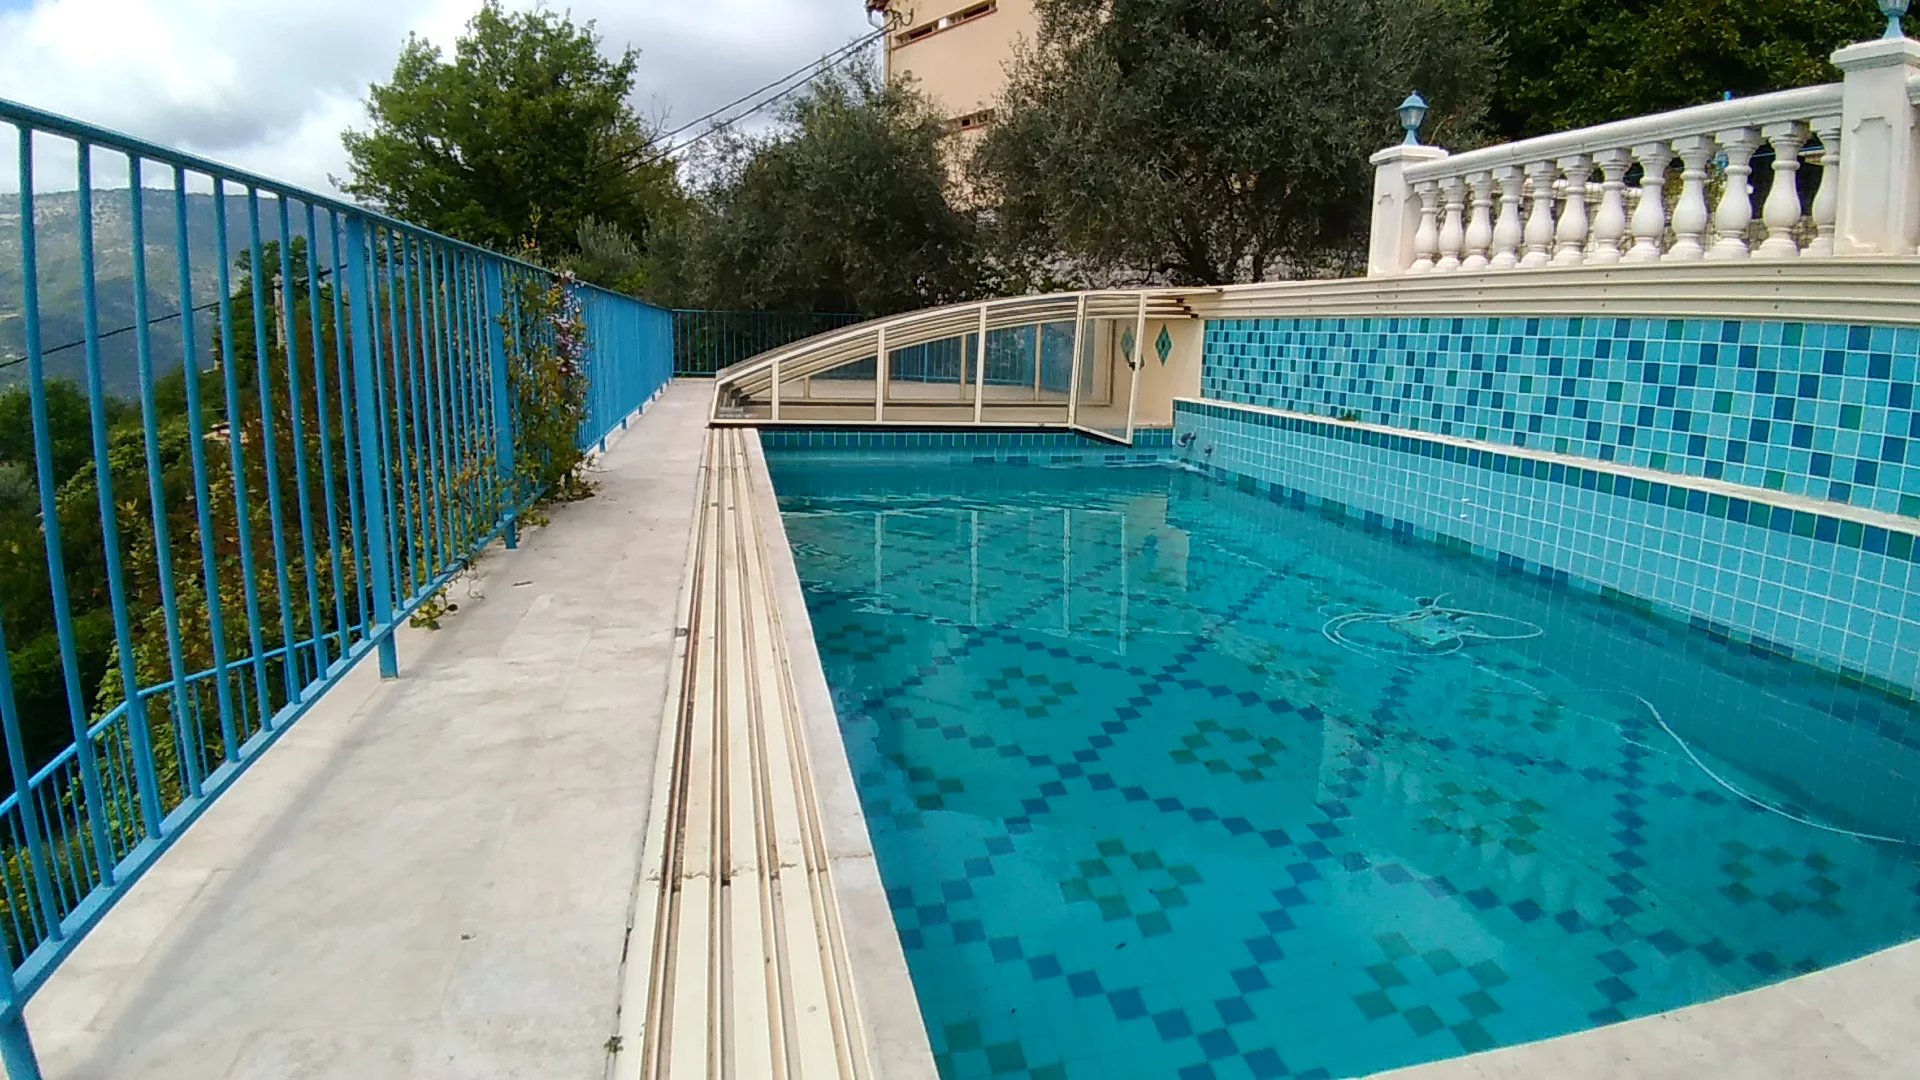 Superb house 242m2 - heated swimming pool - breathtaking view